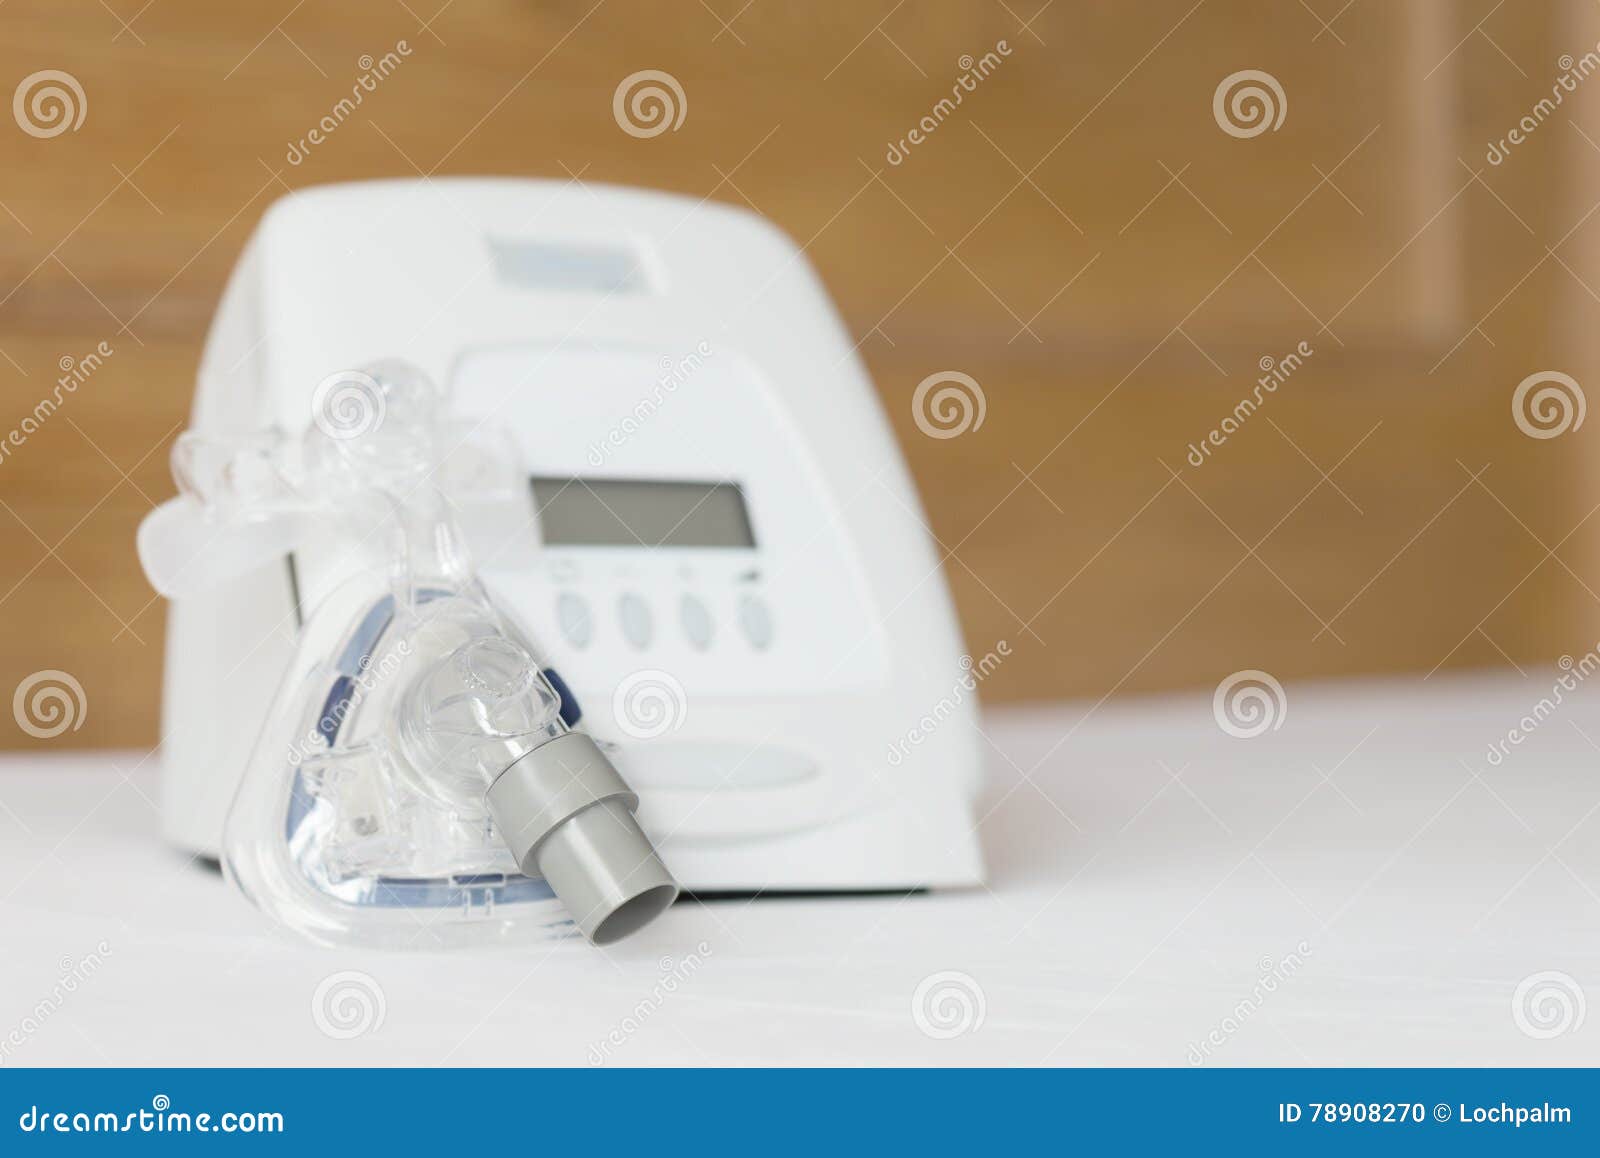 sleep apnea therapy,cpap machine with mask on white bedspread